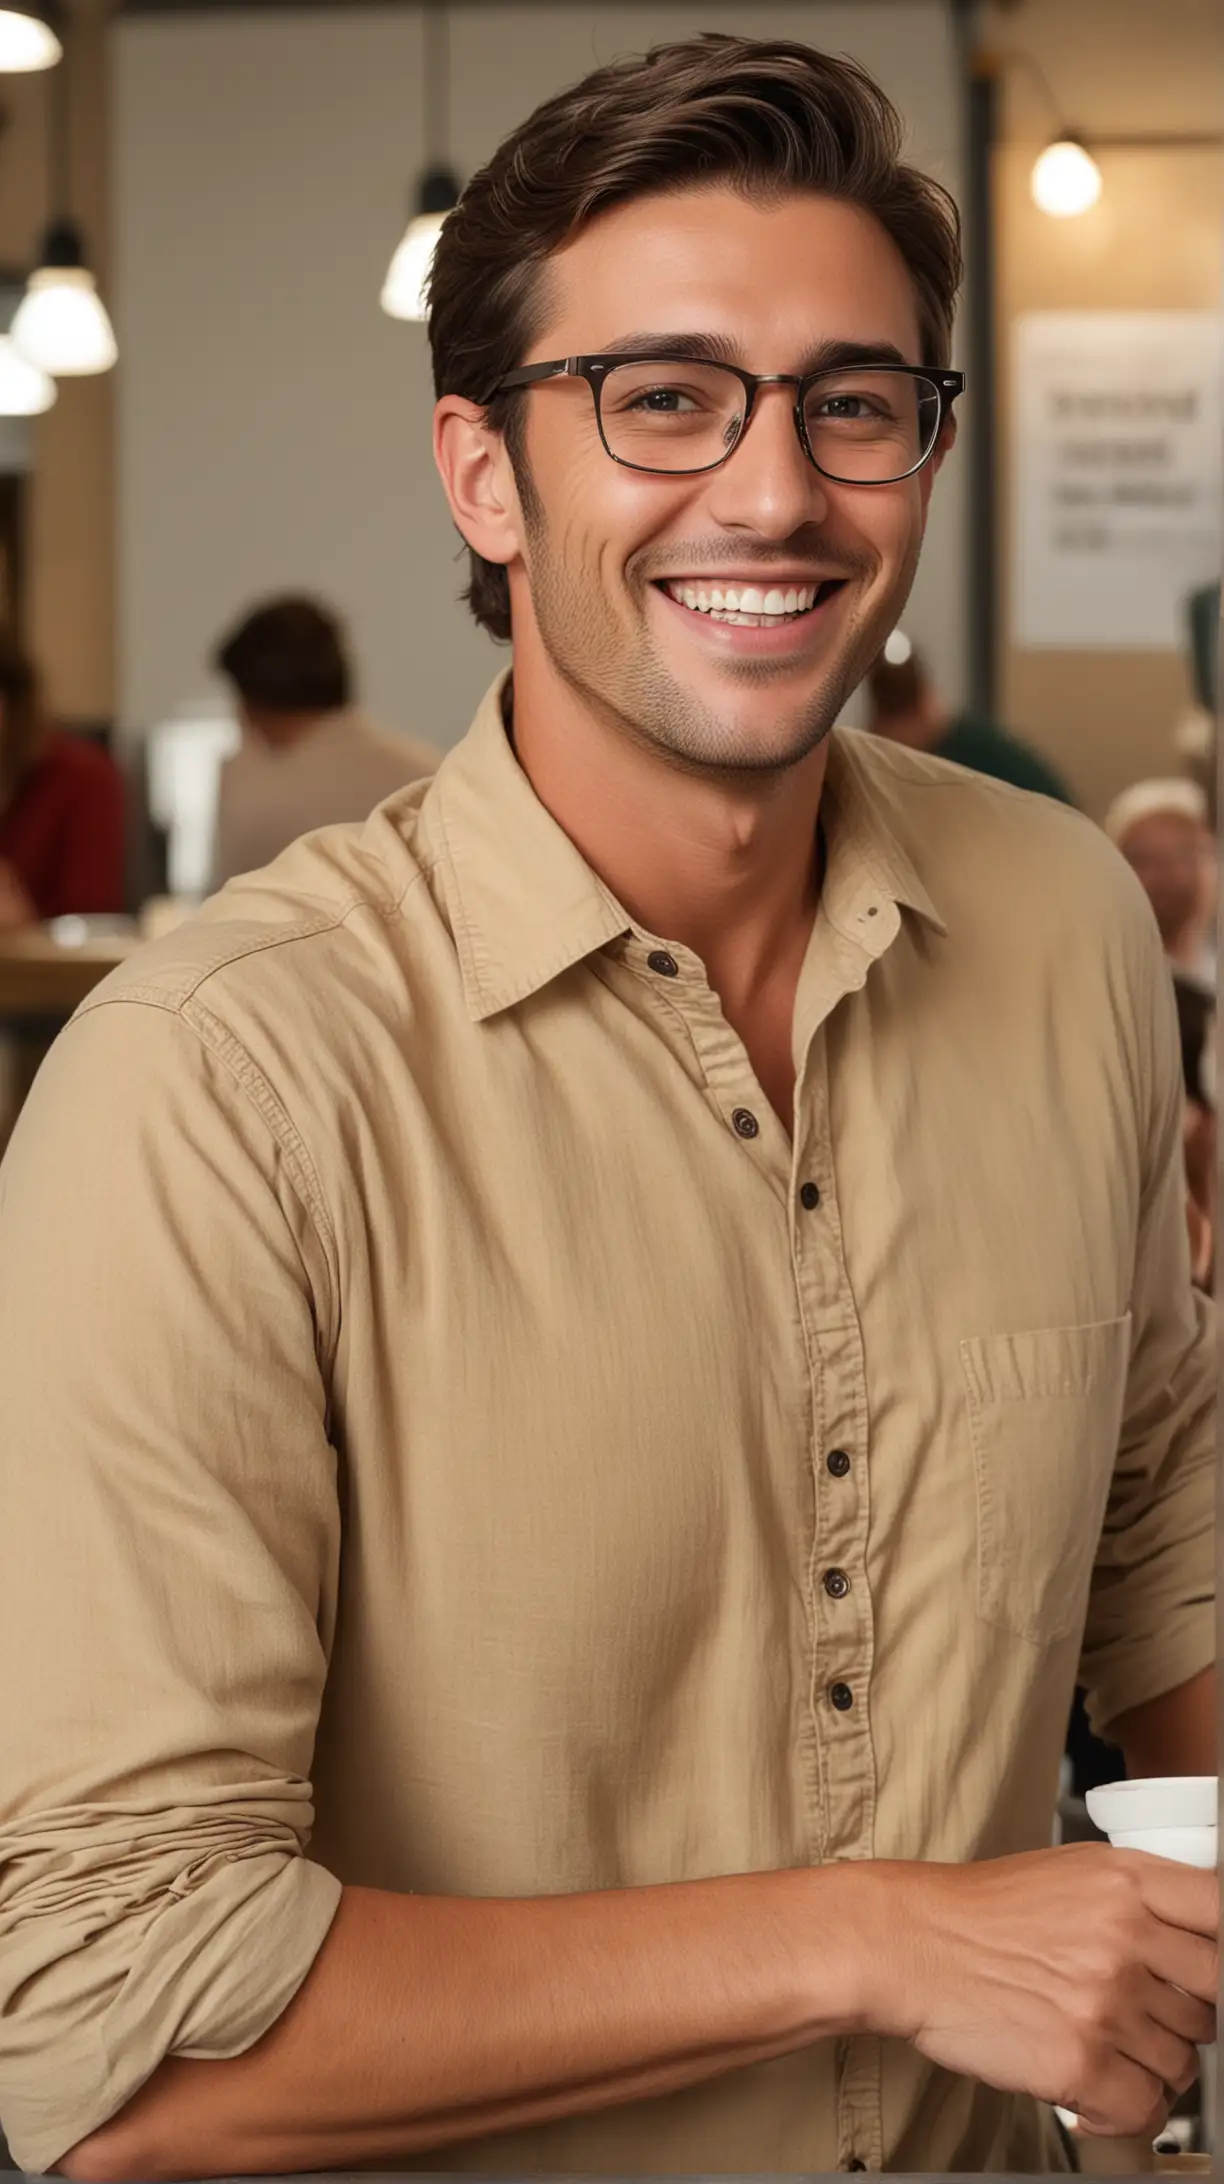 A handsome man with brown hair and glasses standing up at a cafe and smiling  while speaking.  He is wearing a tan colored shirt.